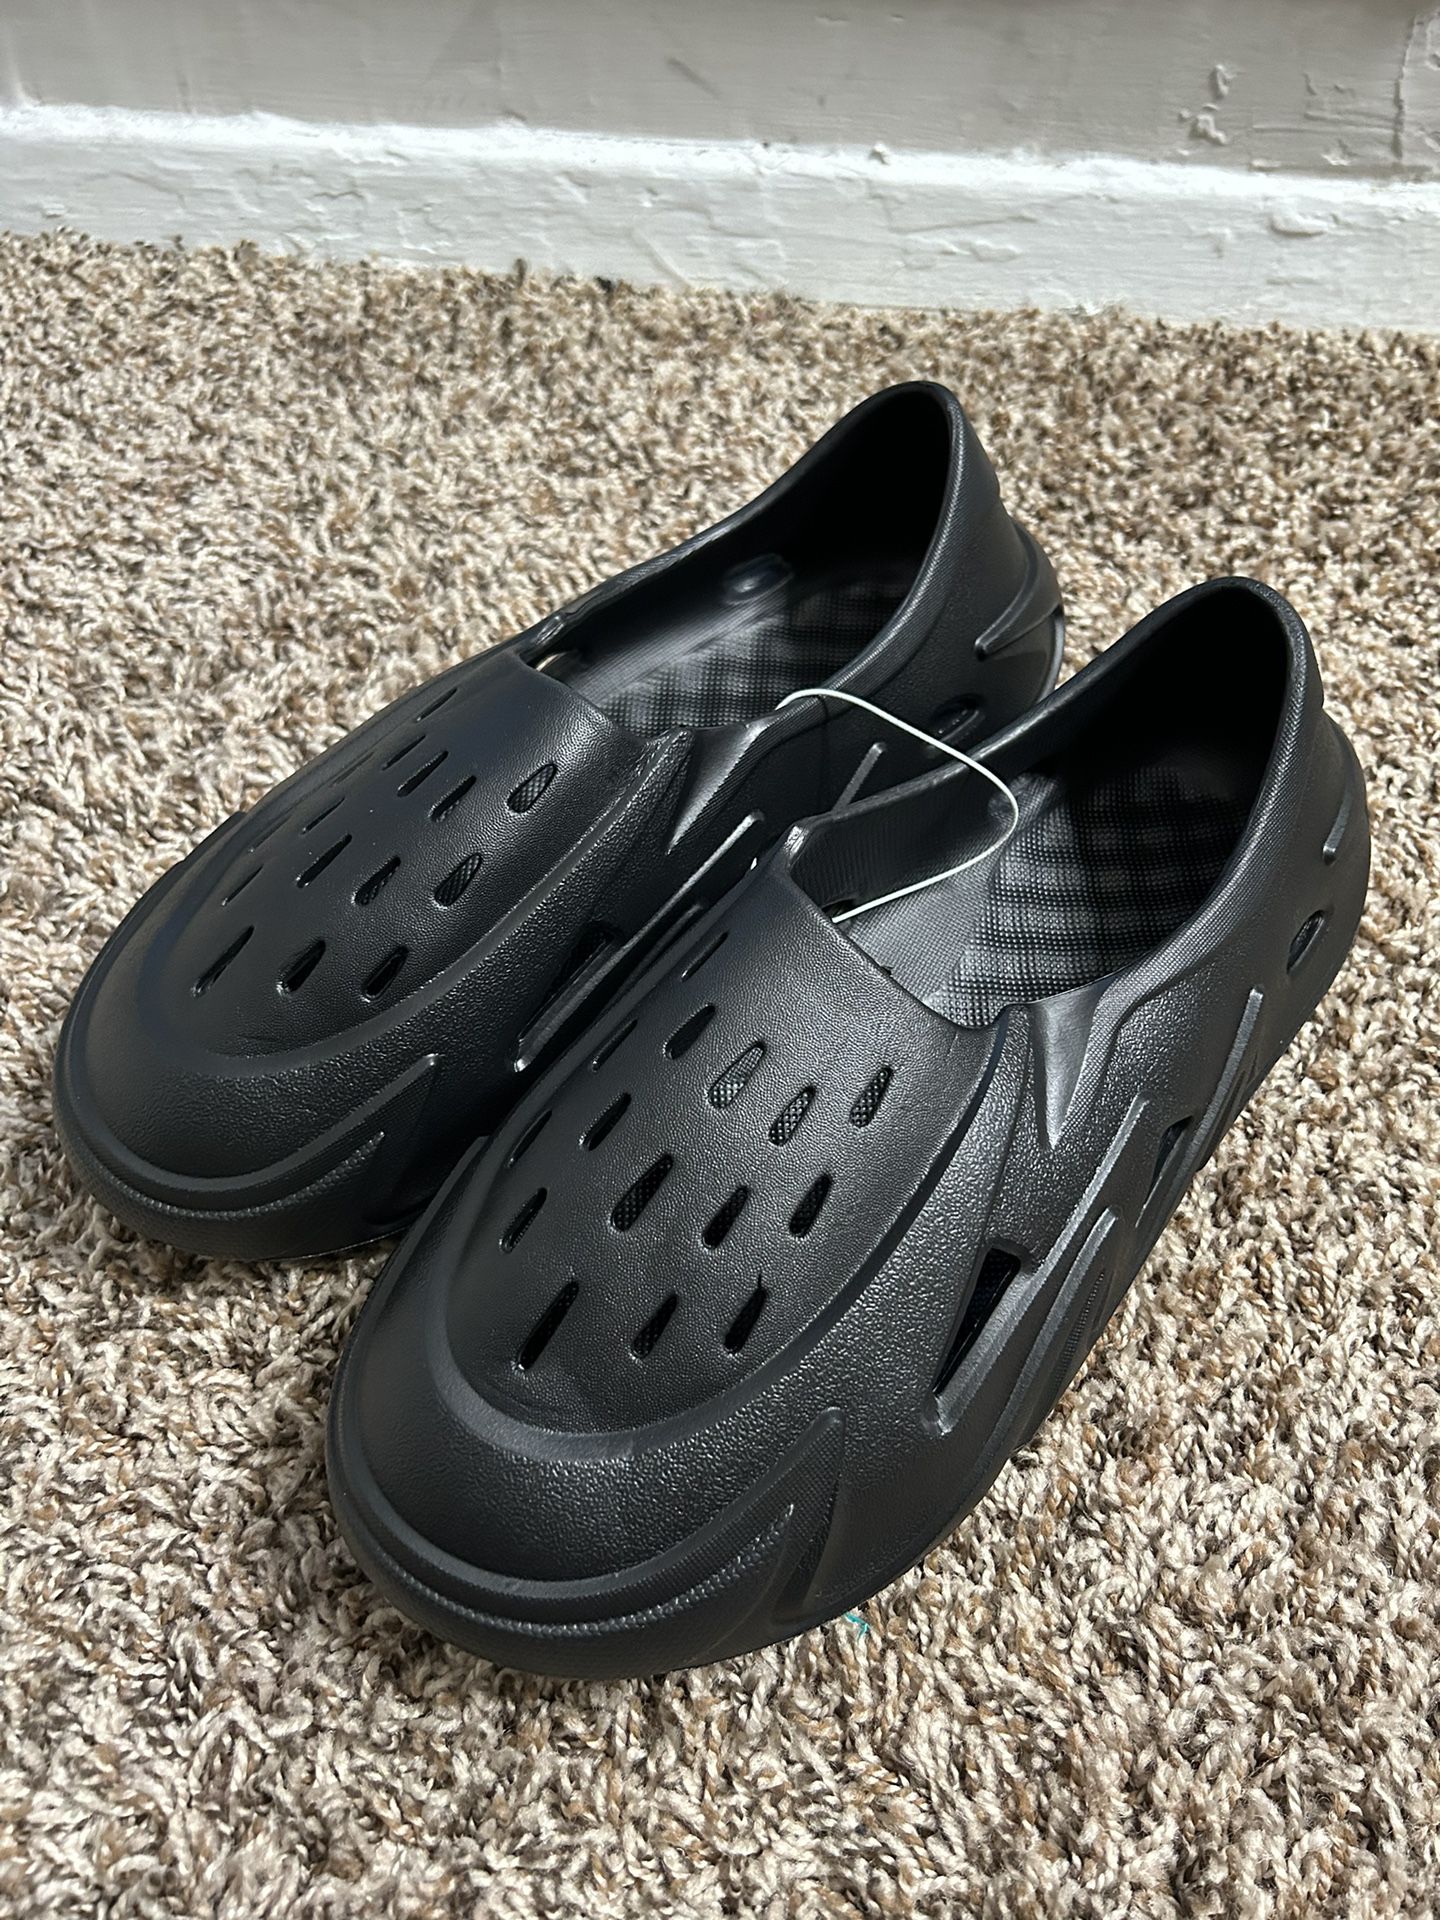 Foam Runners for Sale in Silver Spring, MD - OfferUp